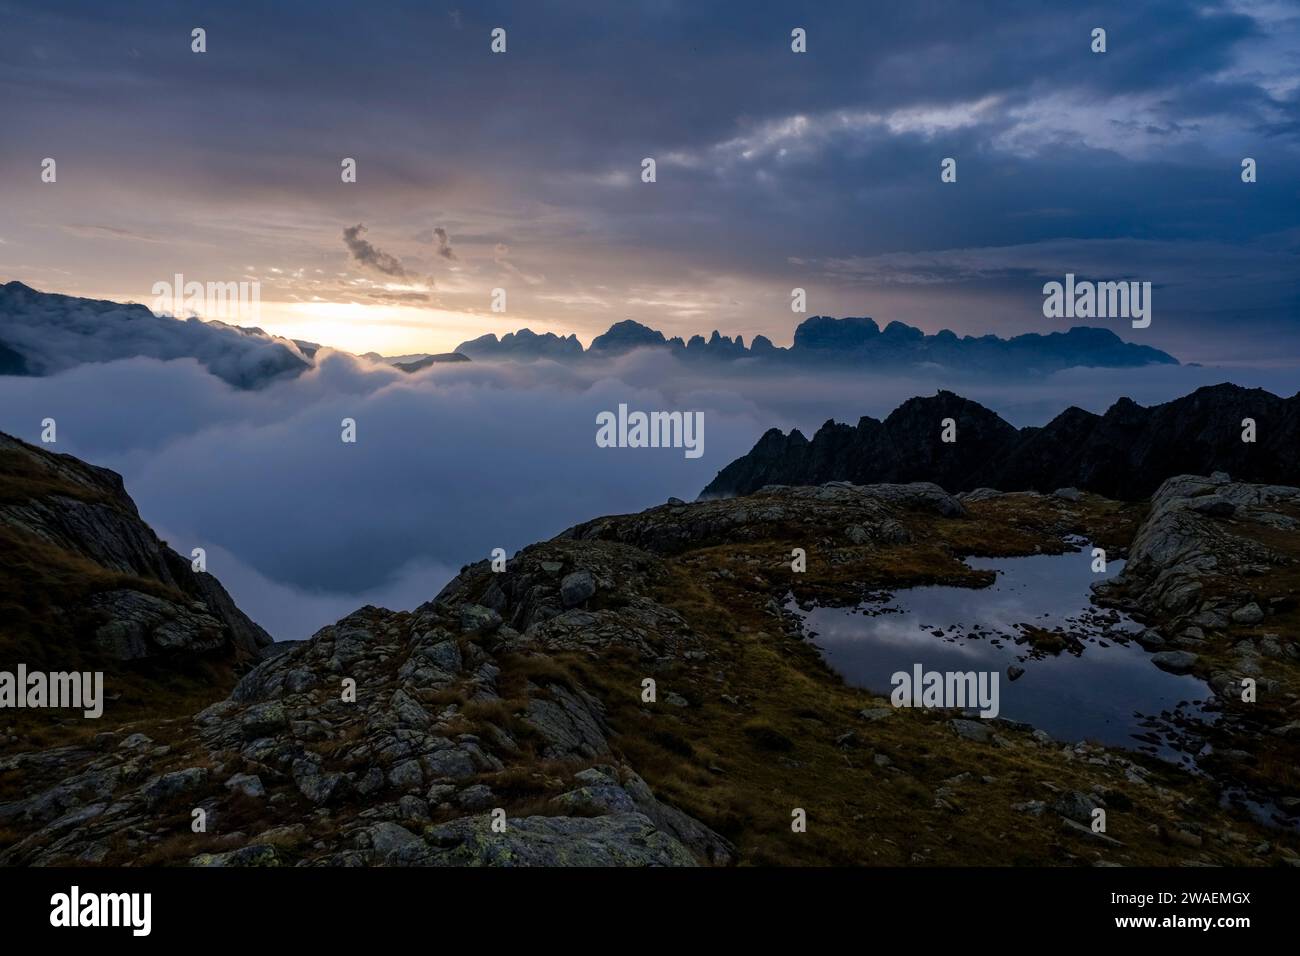 The valley of Sarca di Campiglio covered with clouds, the main range of Brenta Dolomites sticking out of the clouds, at sunrise. Stock Photo